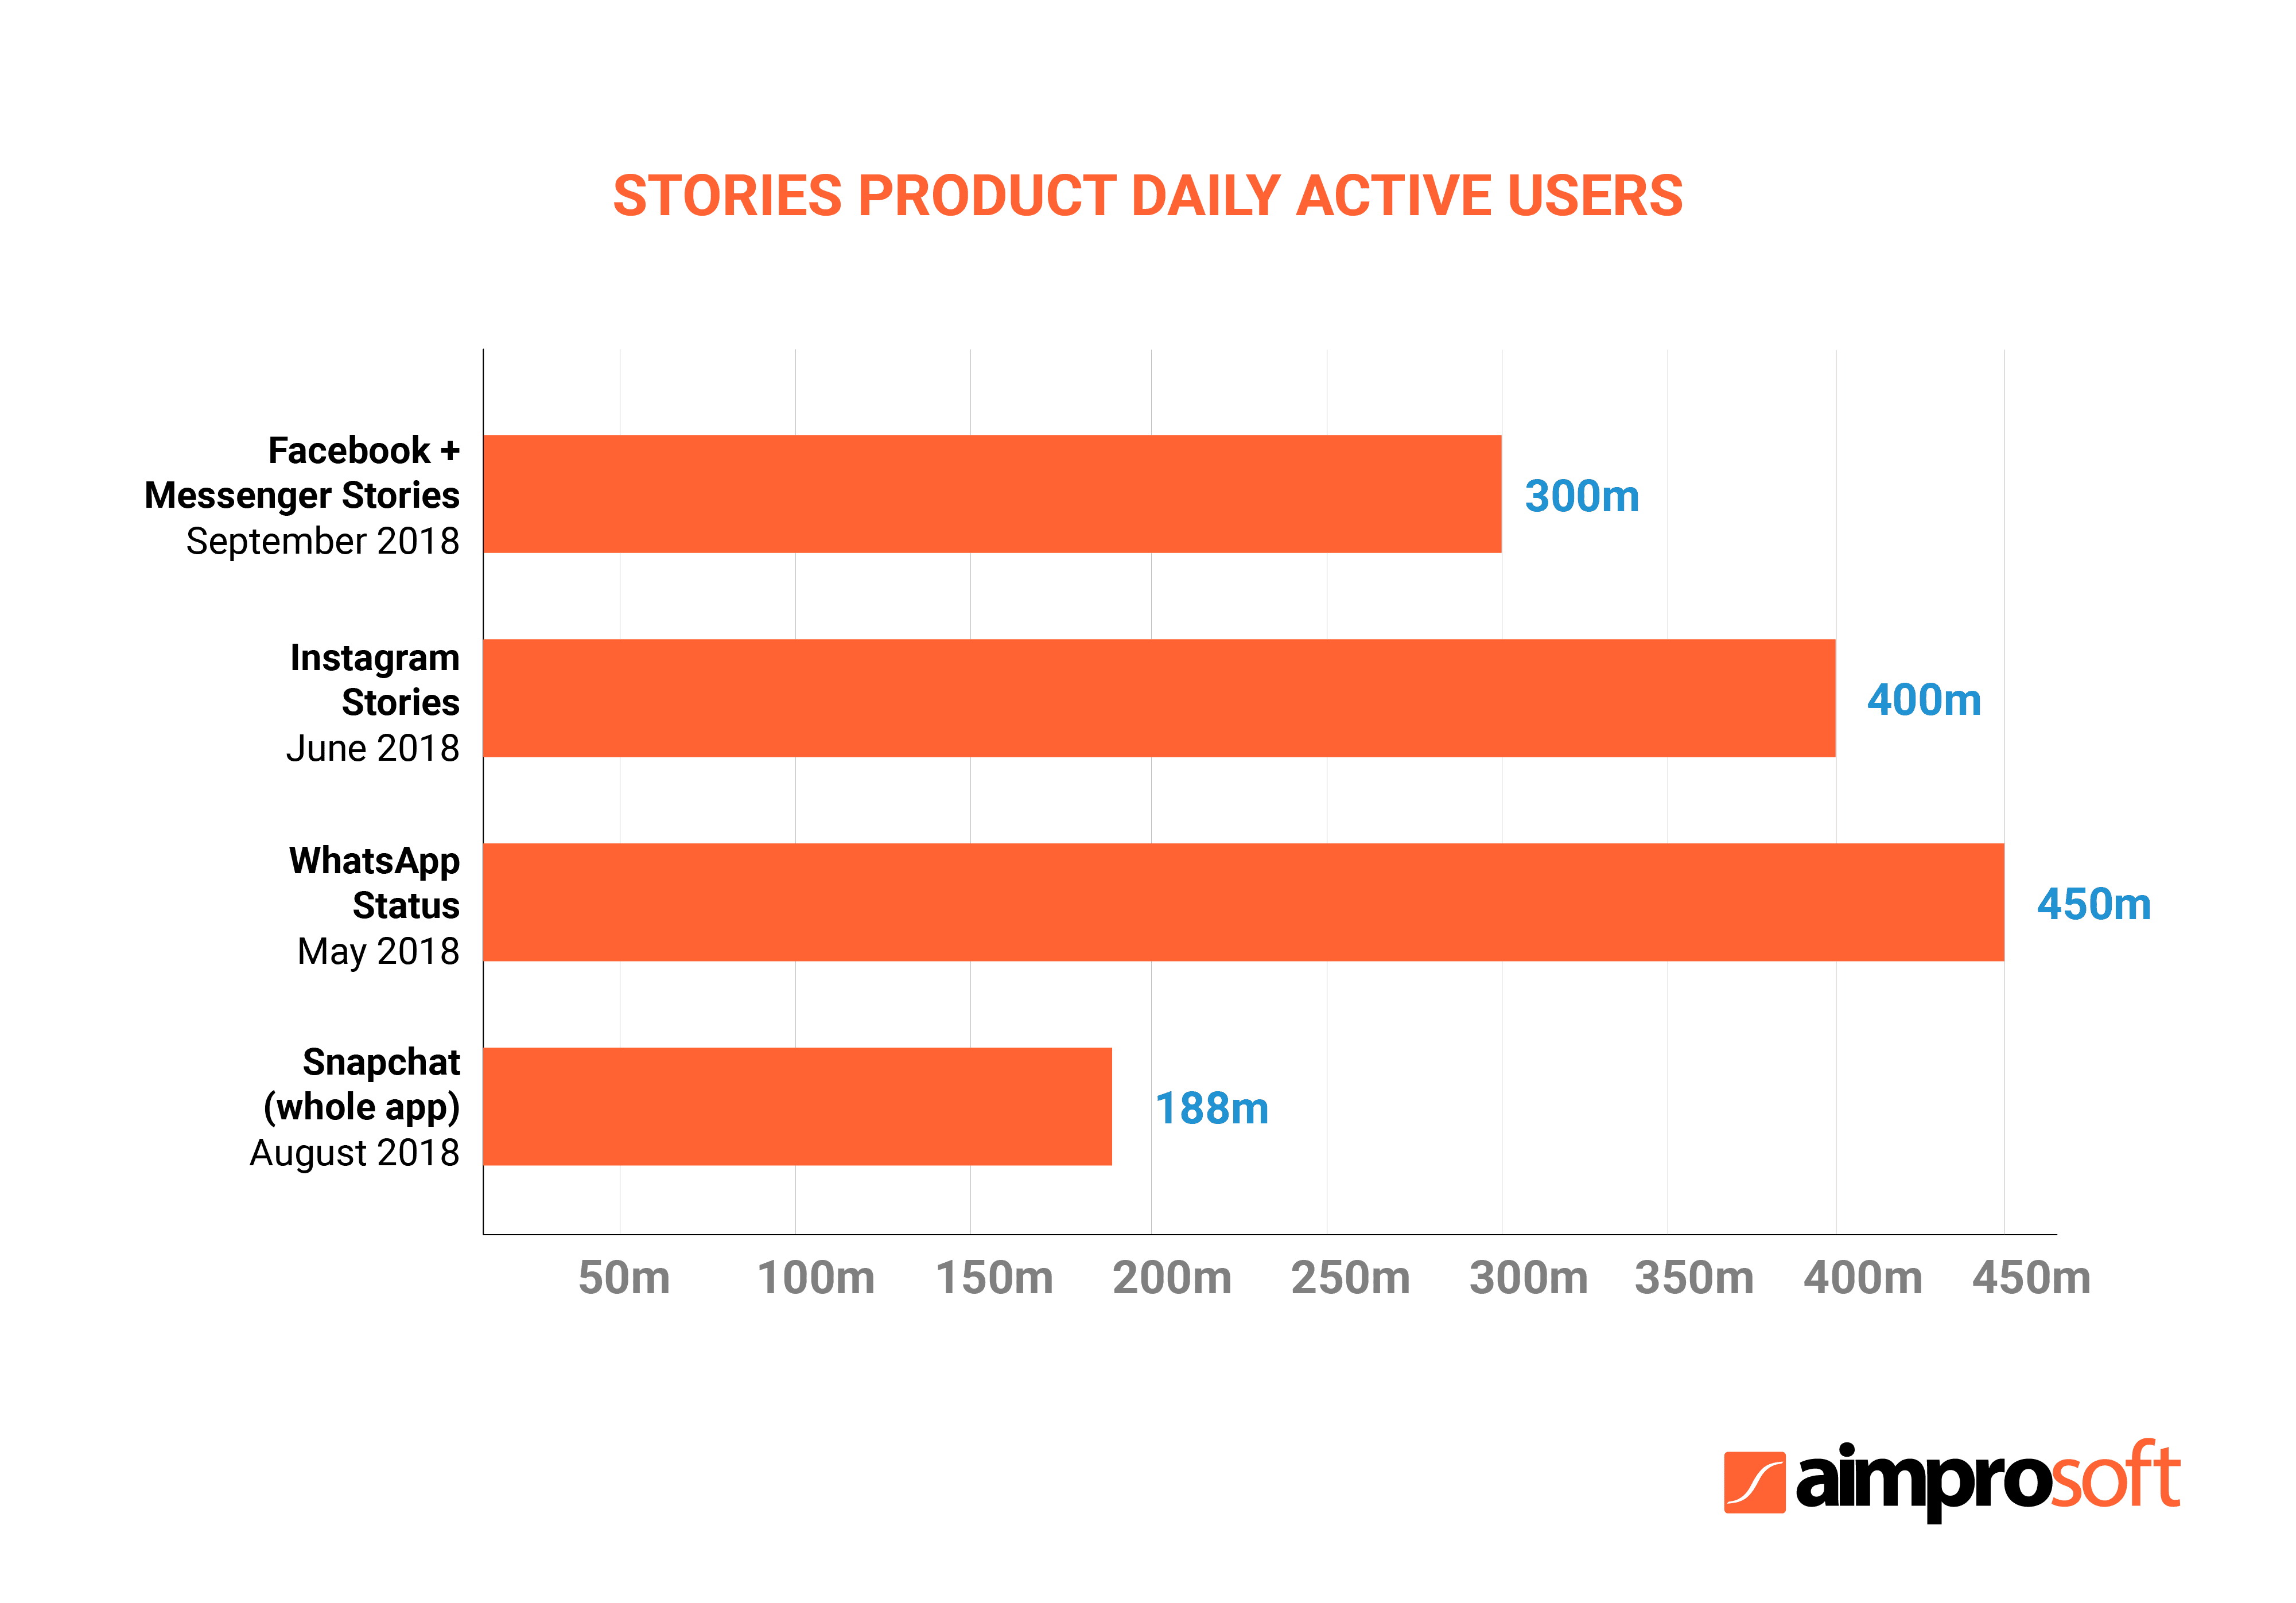 The scope of stories product daily active users